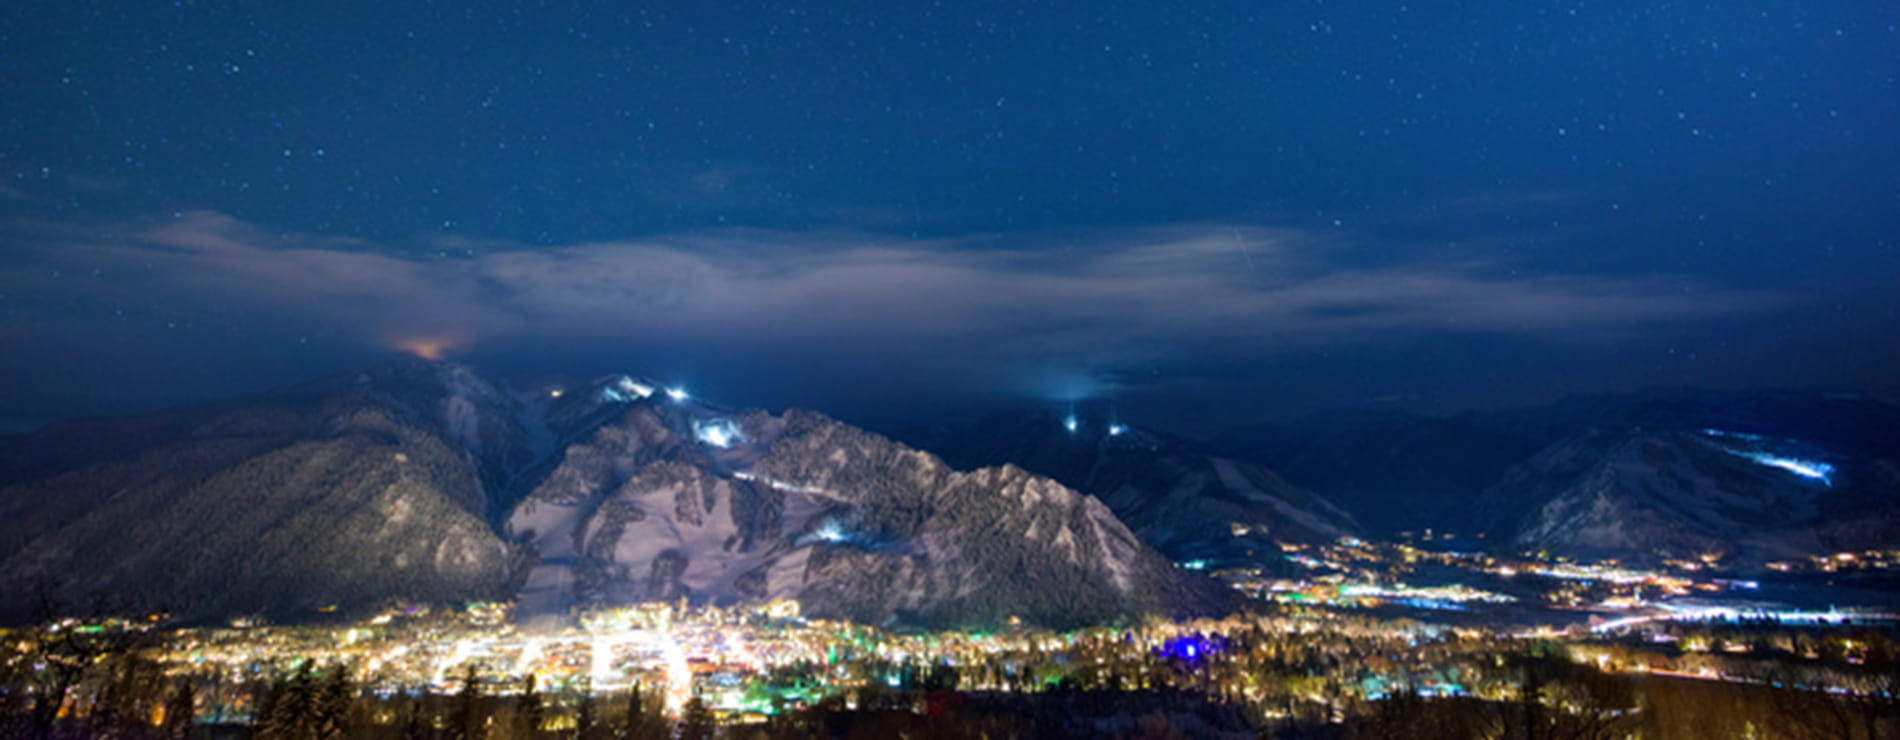 Aspen at Night - Lights on the Hill | Limelight Hotels